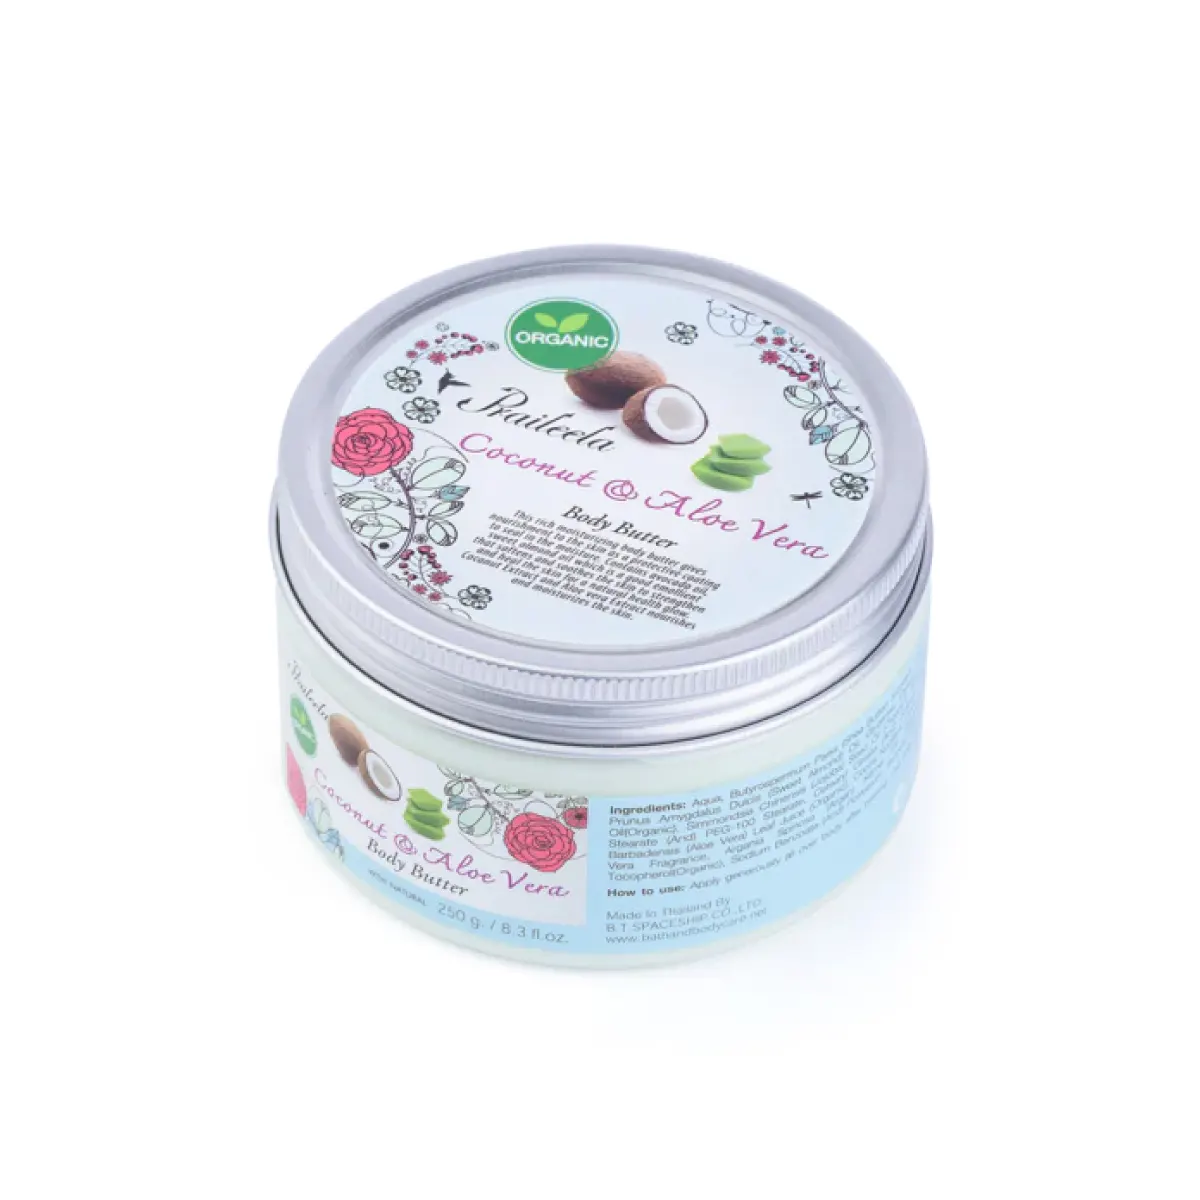 OEM Private Label Body Butter Natural Whitening Moisturizing Nourishing Thailand Bestselling Skin Care Product From Thailand